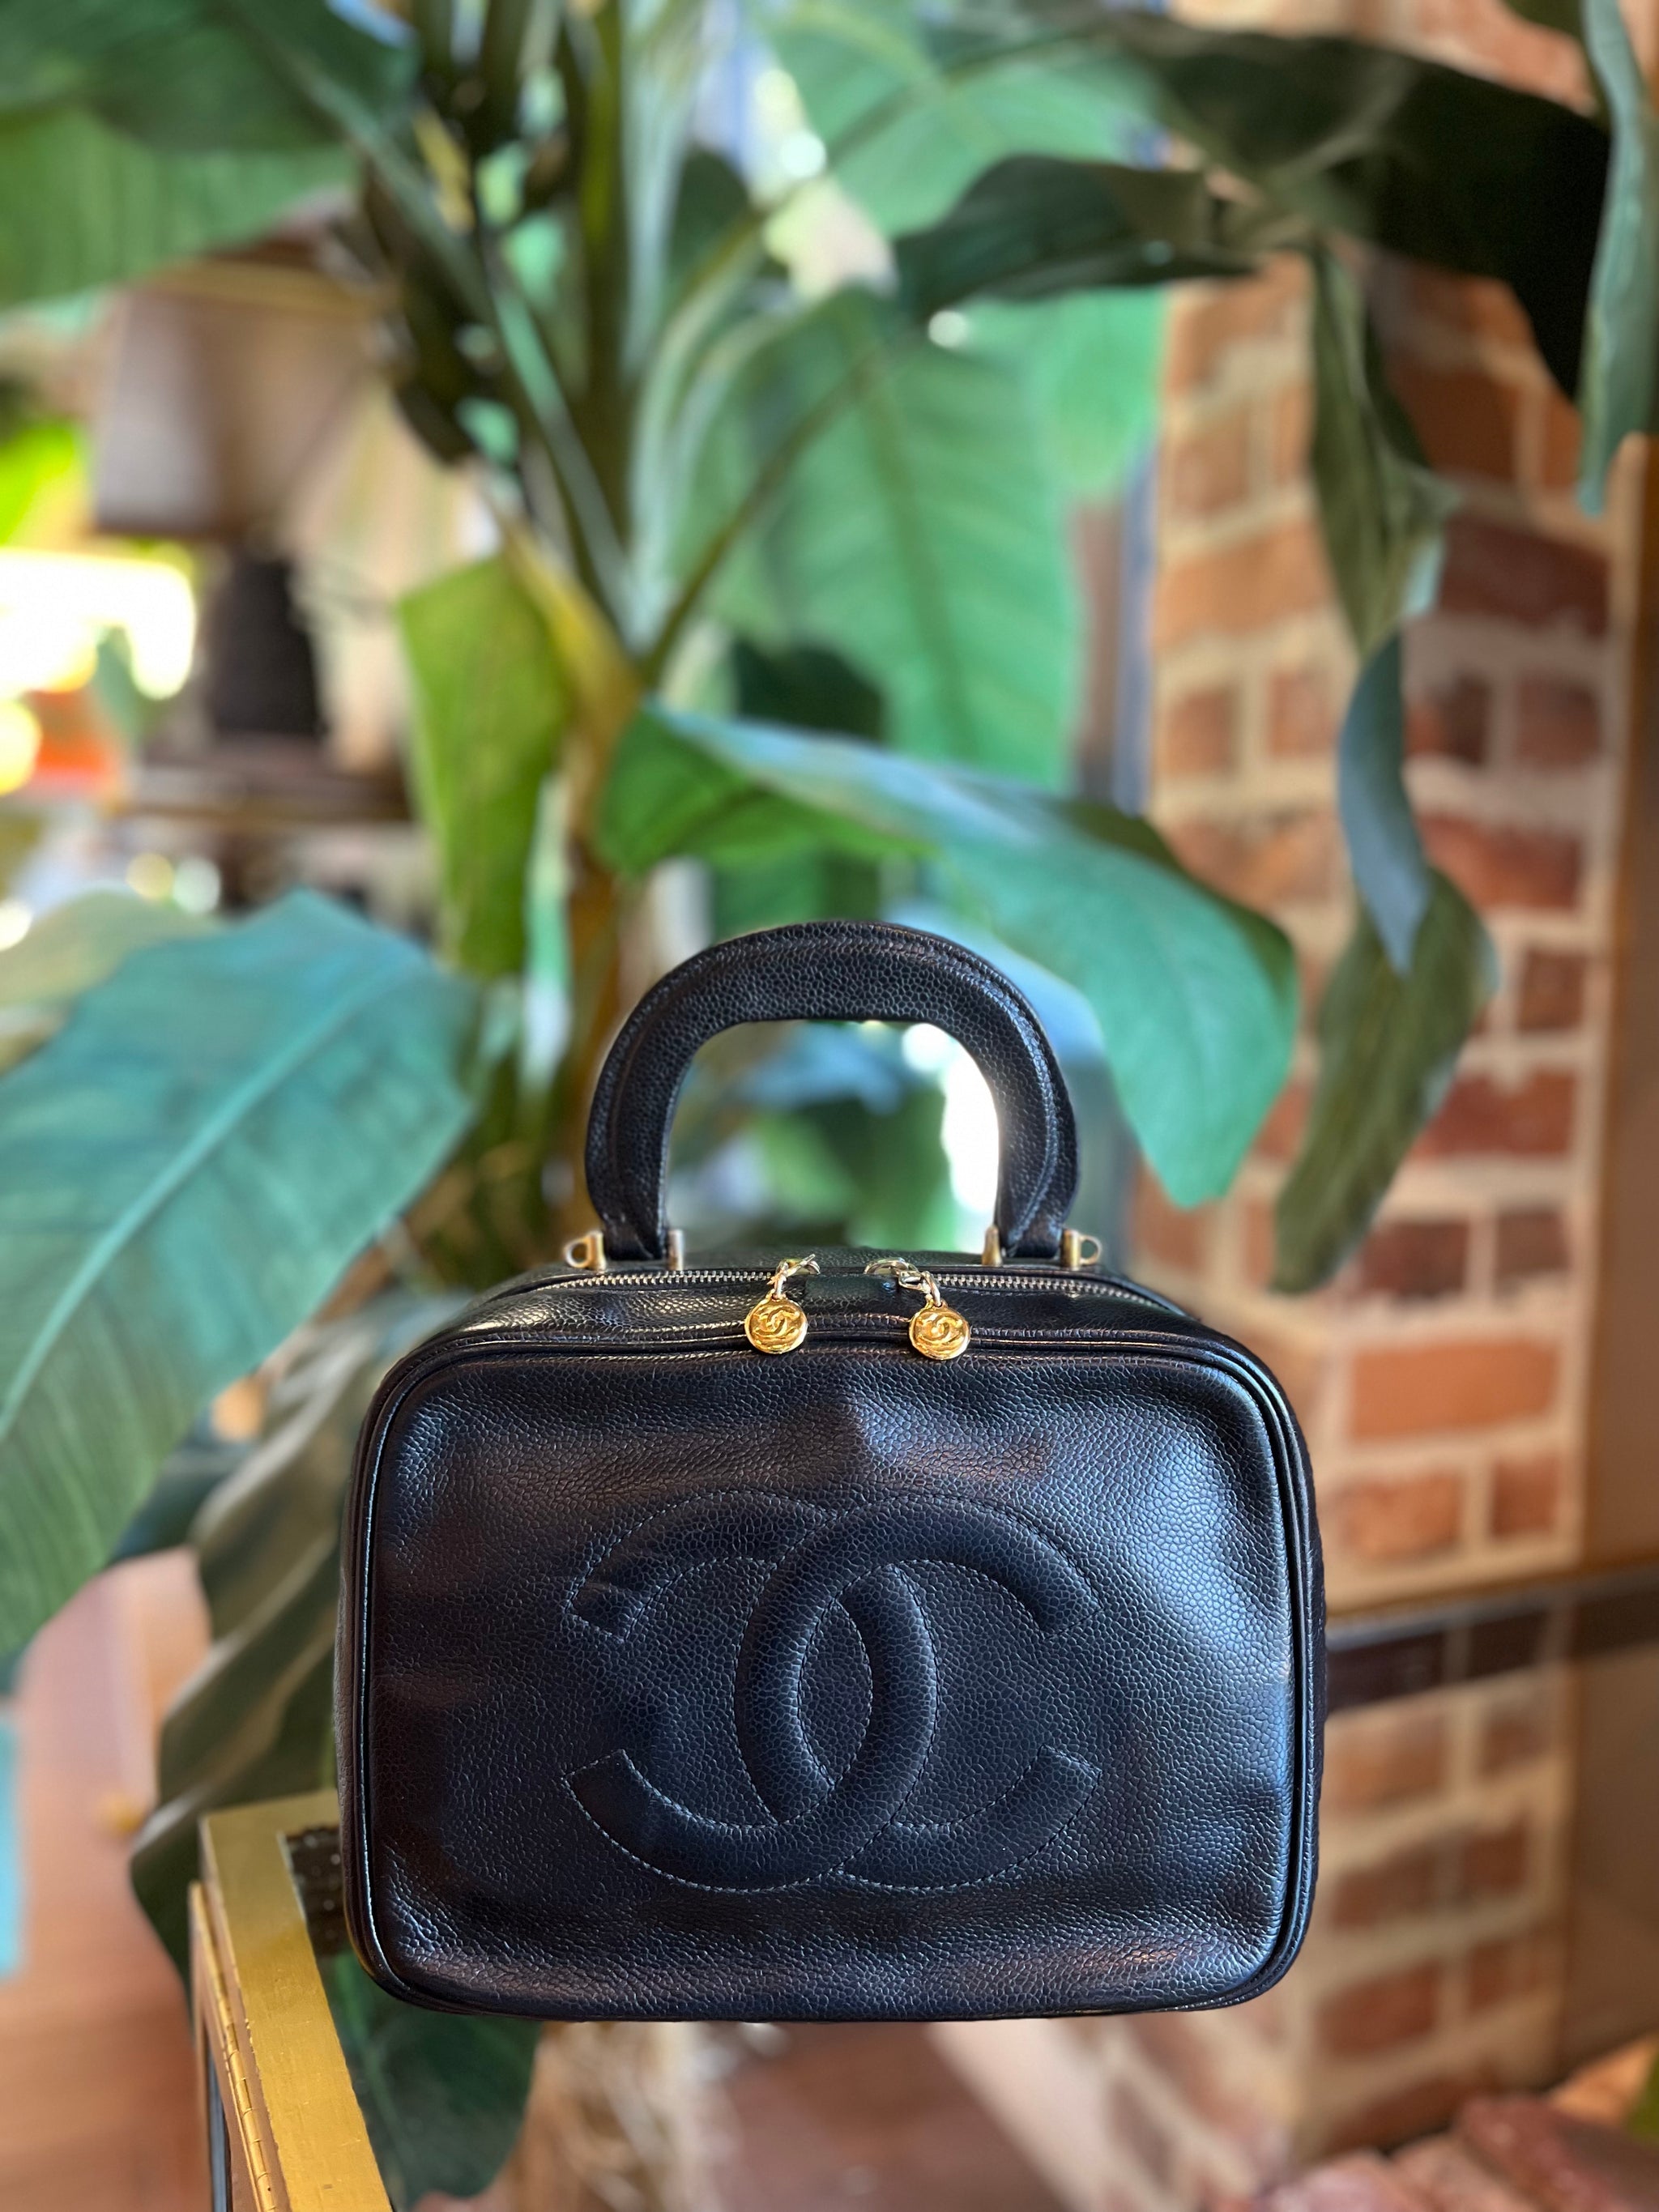 CHANEL Black Leather Front Turnlock Front Pocket Tote - The Purse